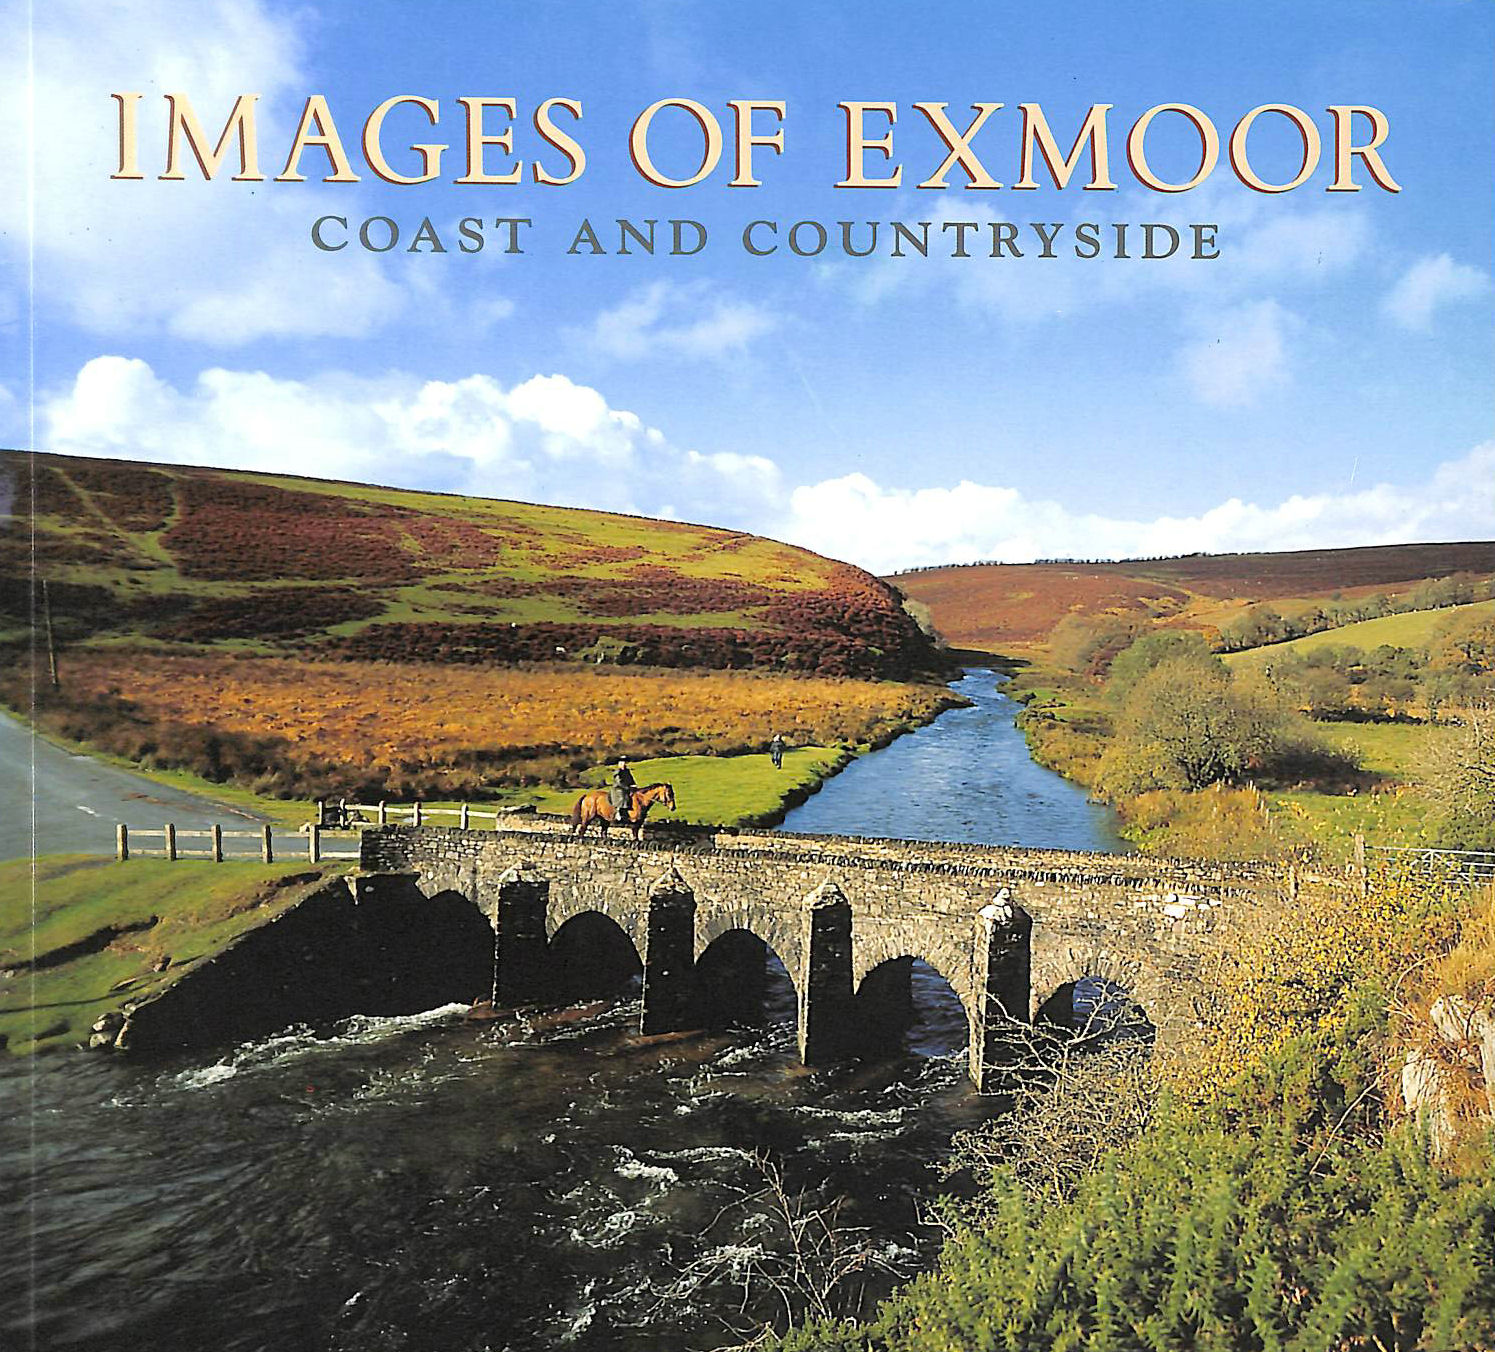 ANON - Images of Exmoor: Coast and Countryside